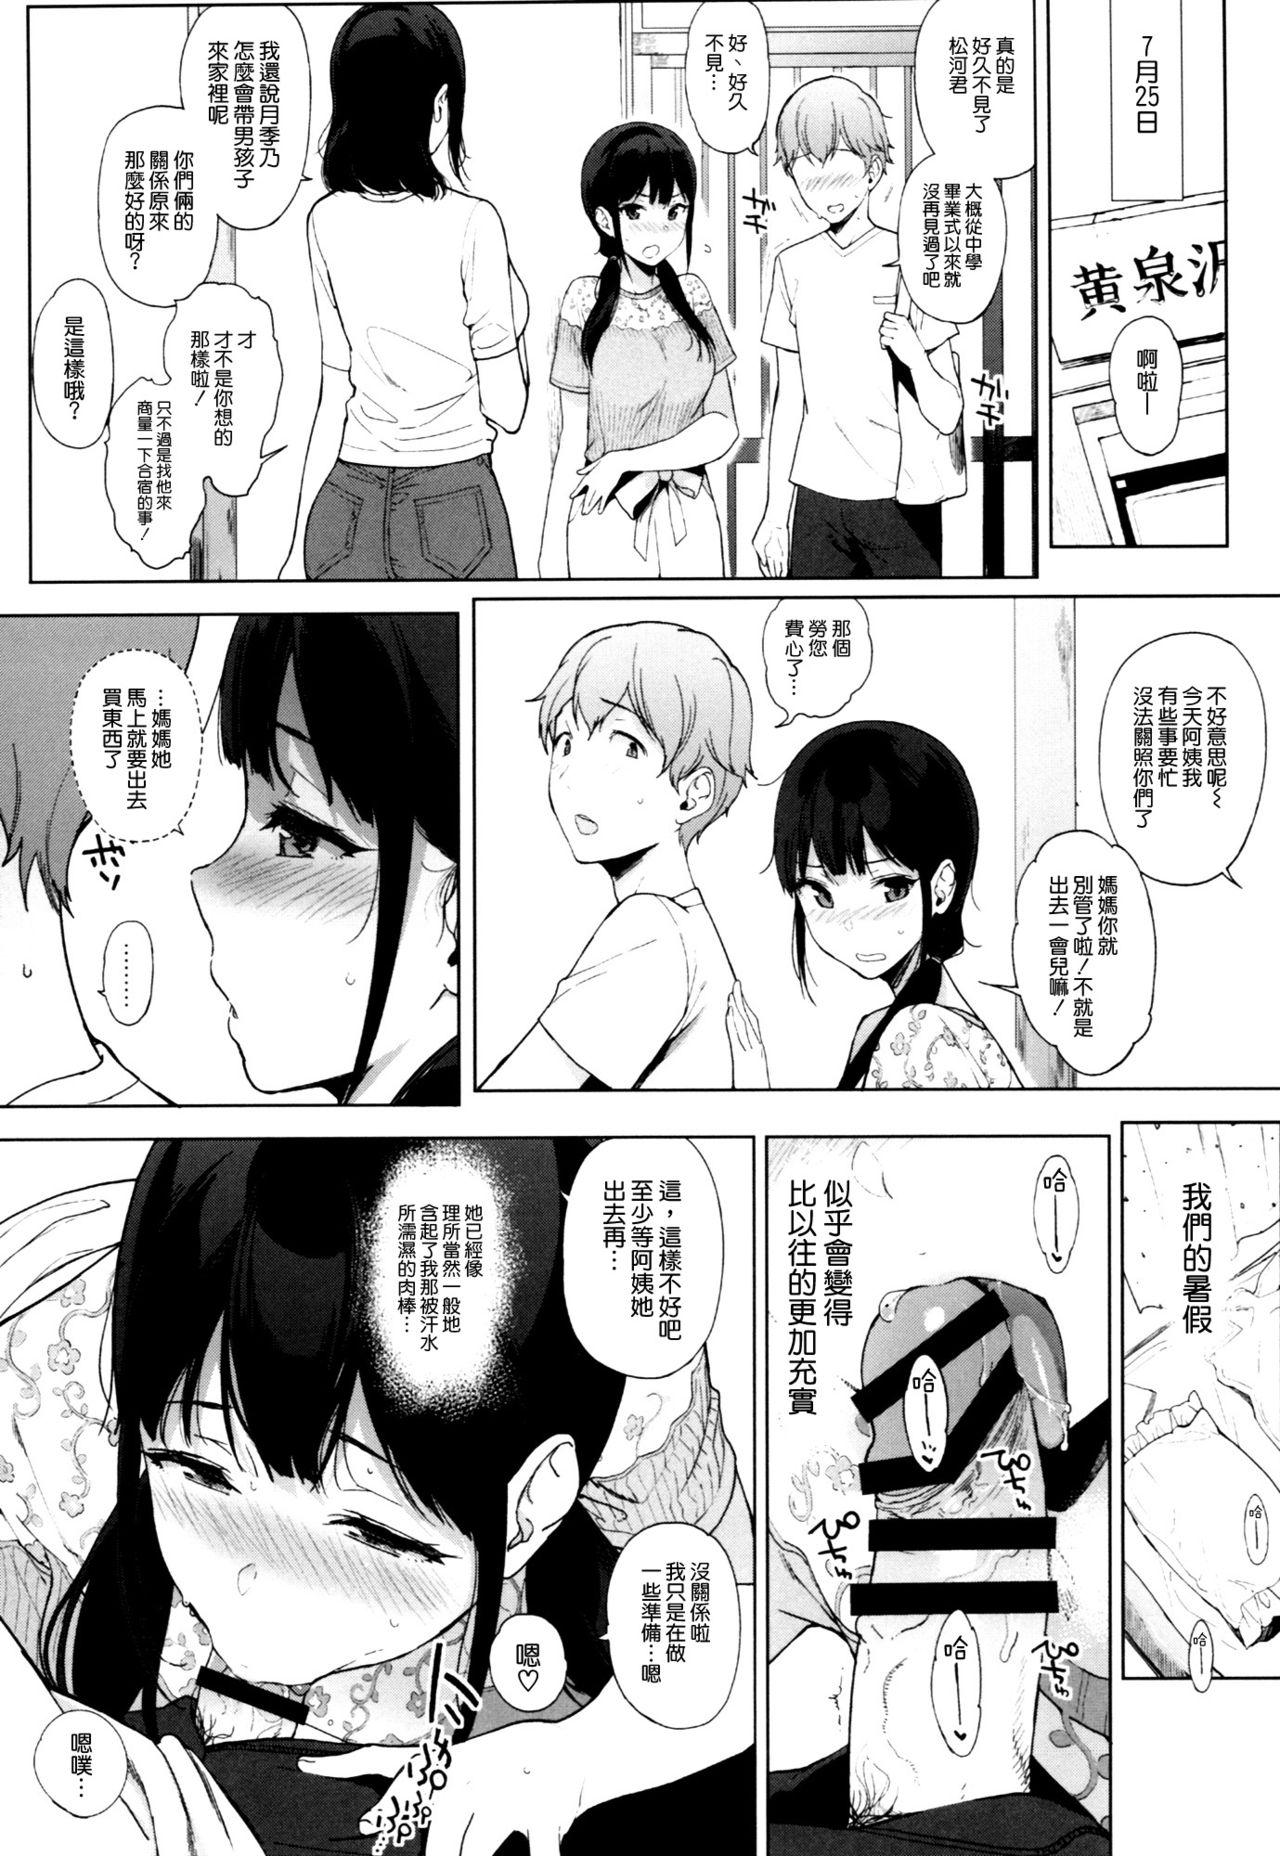 Classroom Succubus Stayed Life 7 Black Hair - Page 5